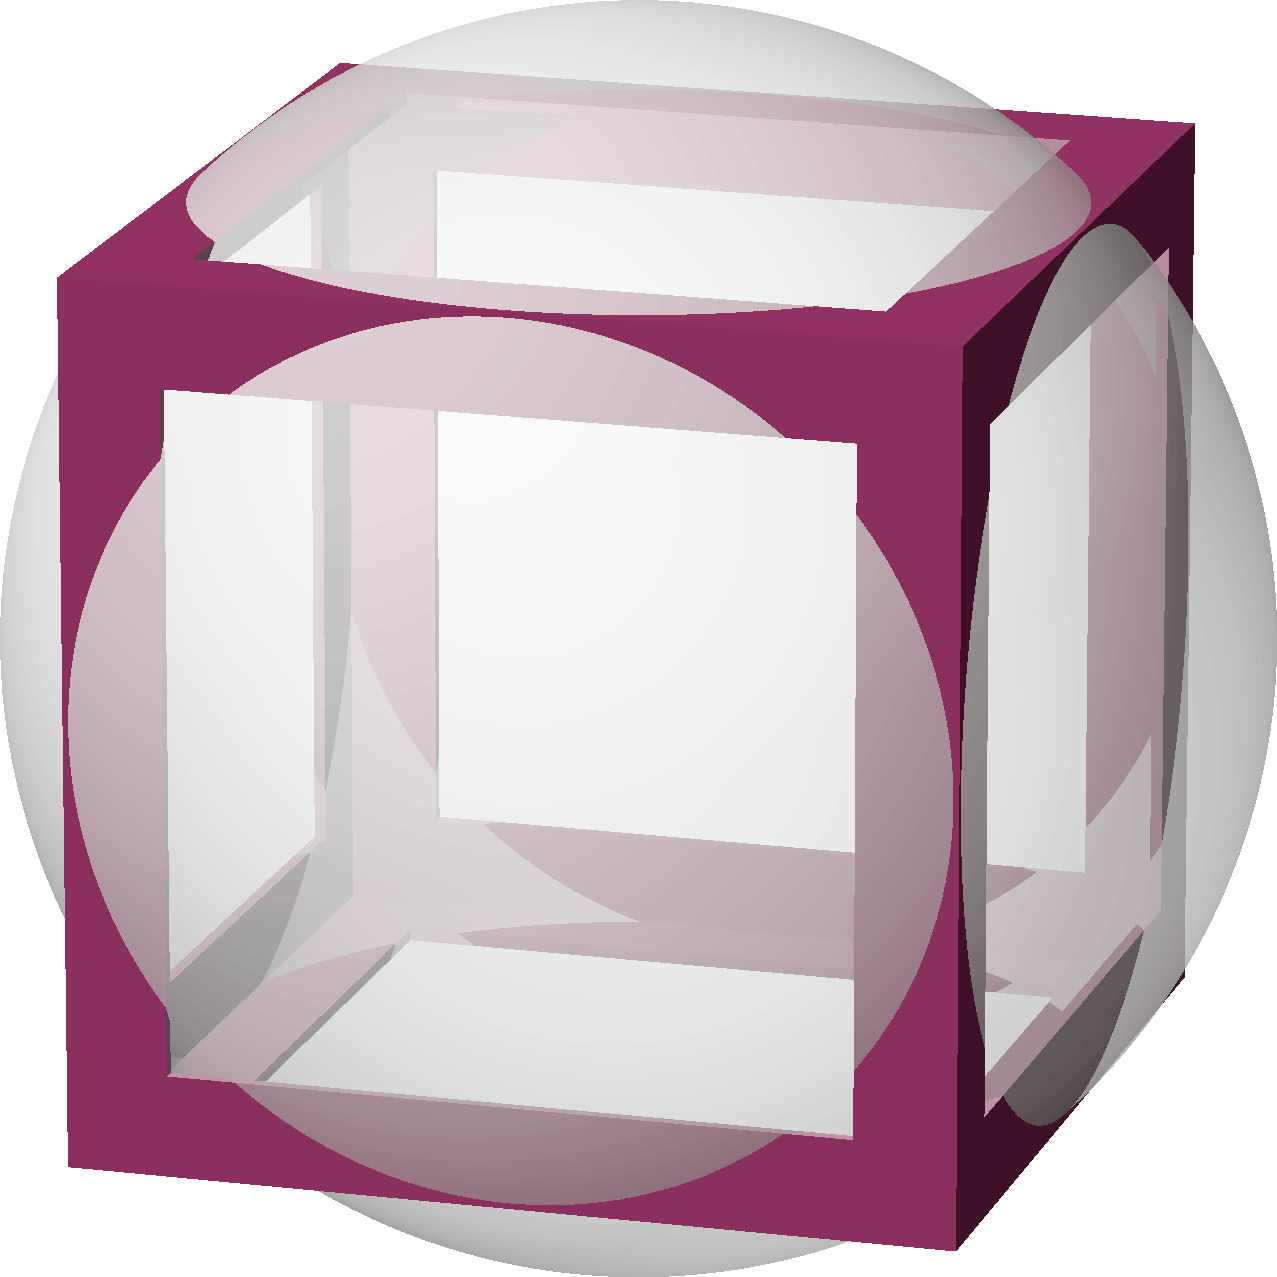 A cube and its midsphere